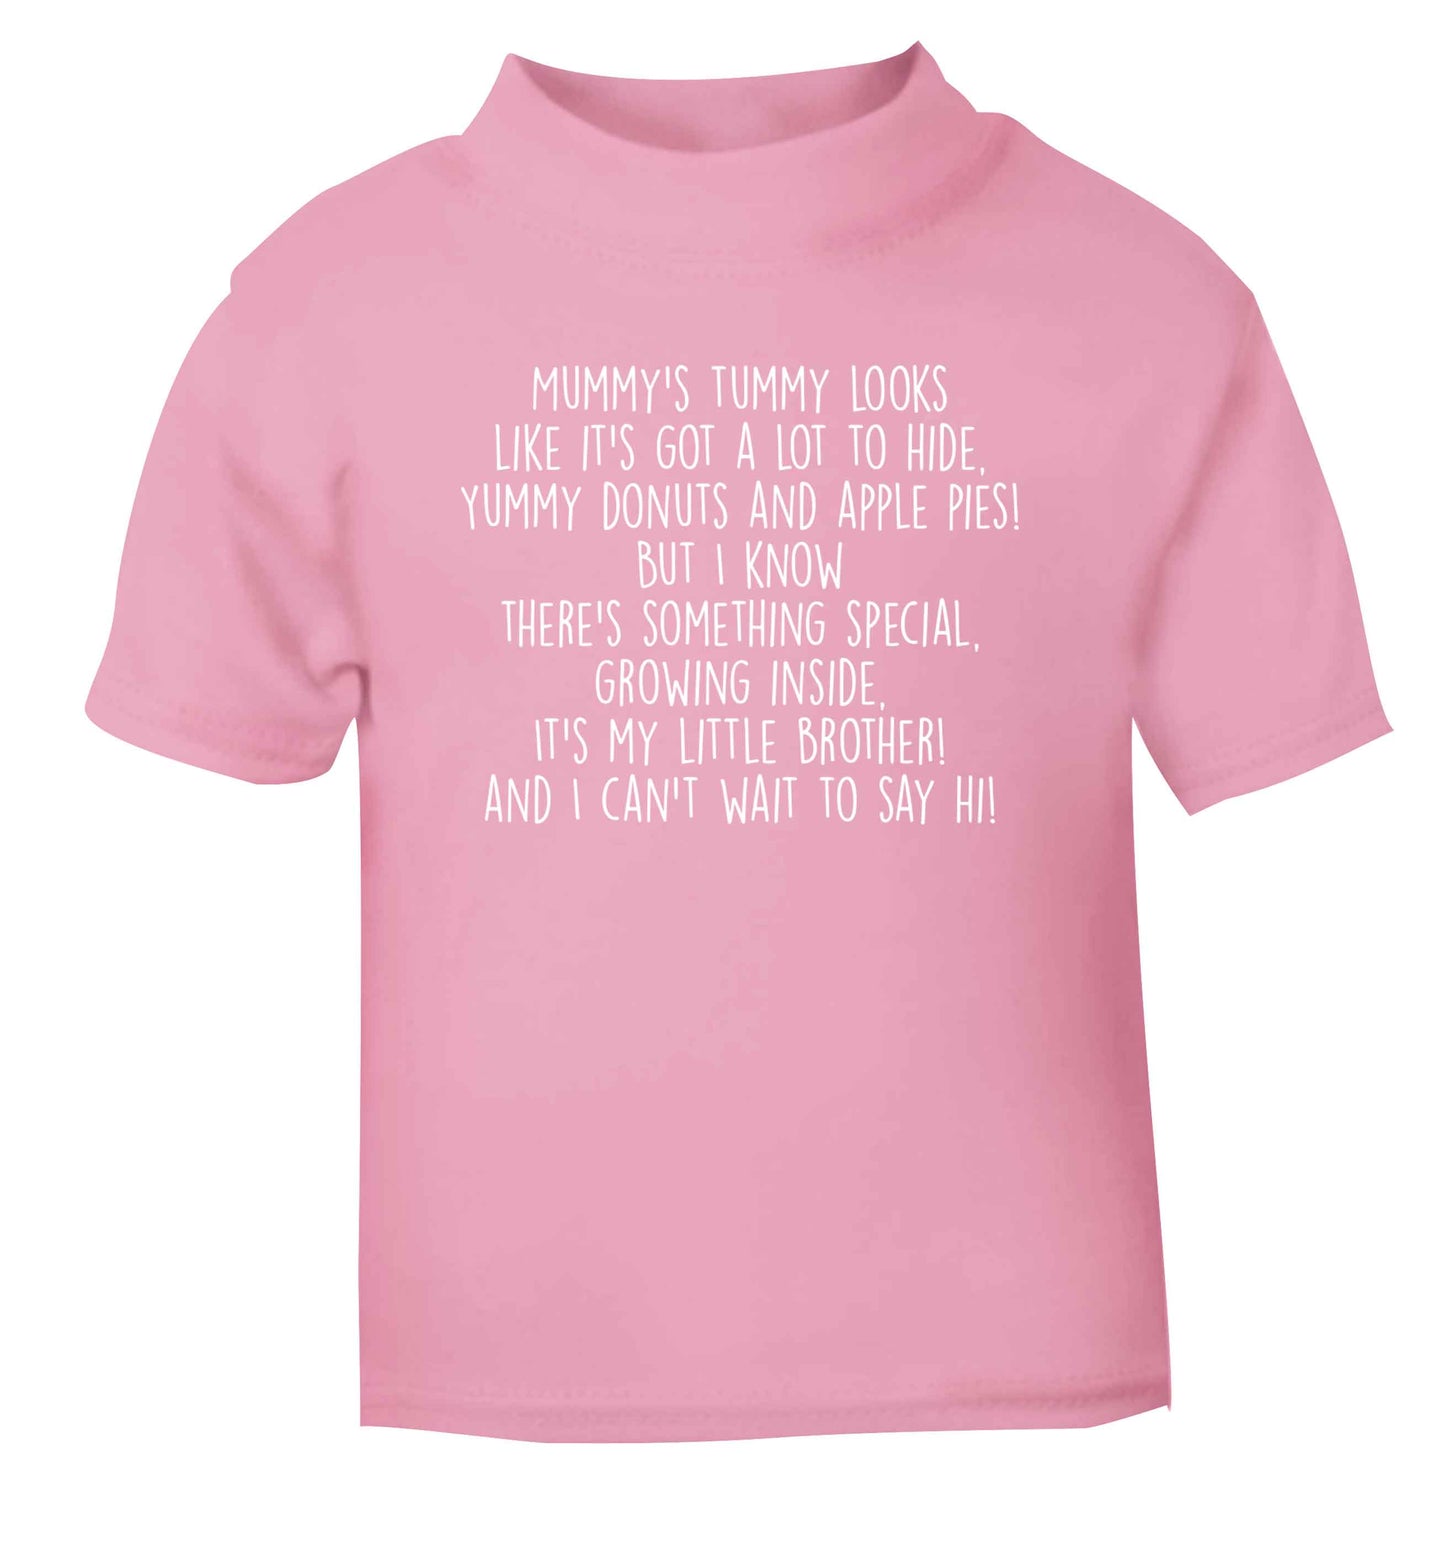 Something special growing inside it's my little brother I can't wait to say hi! light pink Baby Toddler Tshirt 2 Years